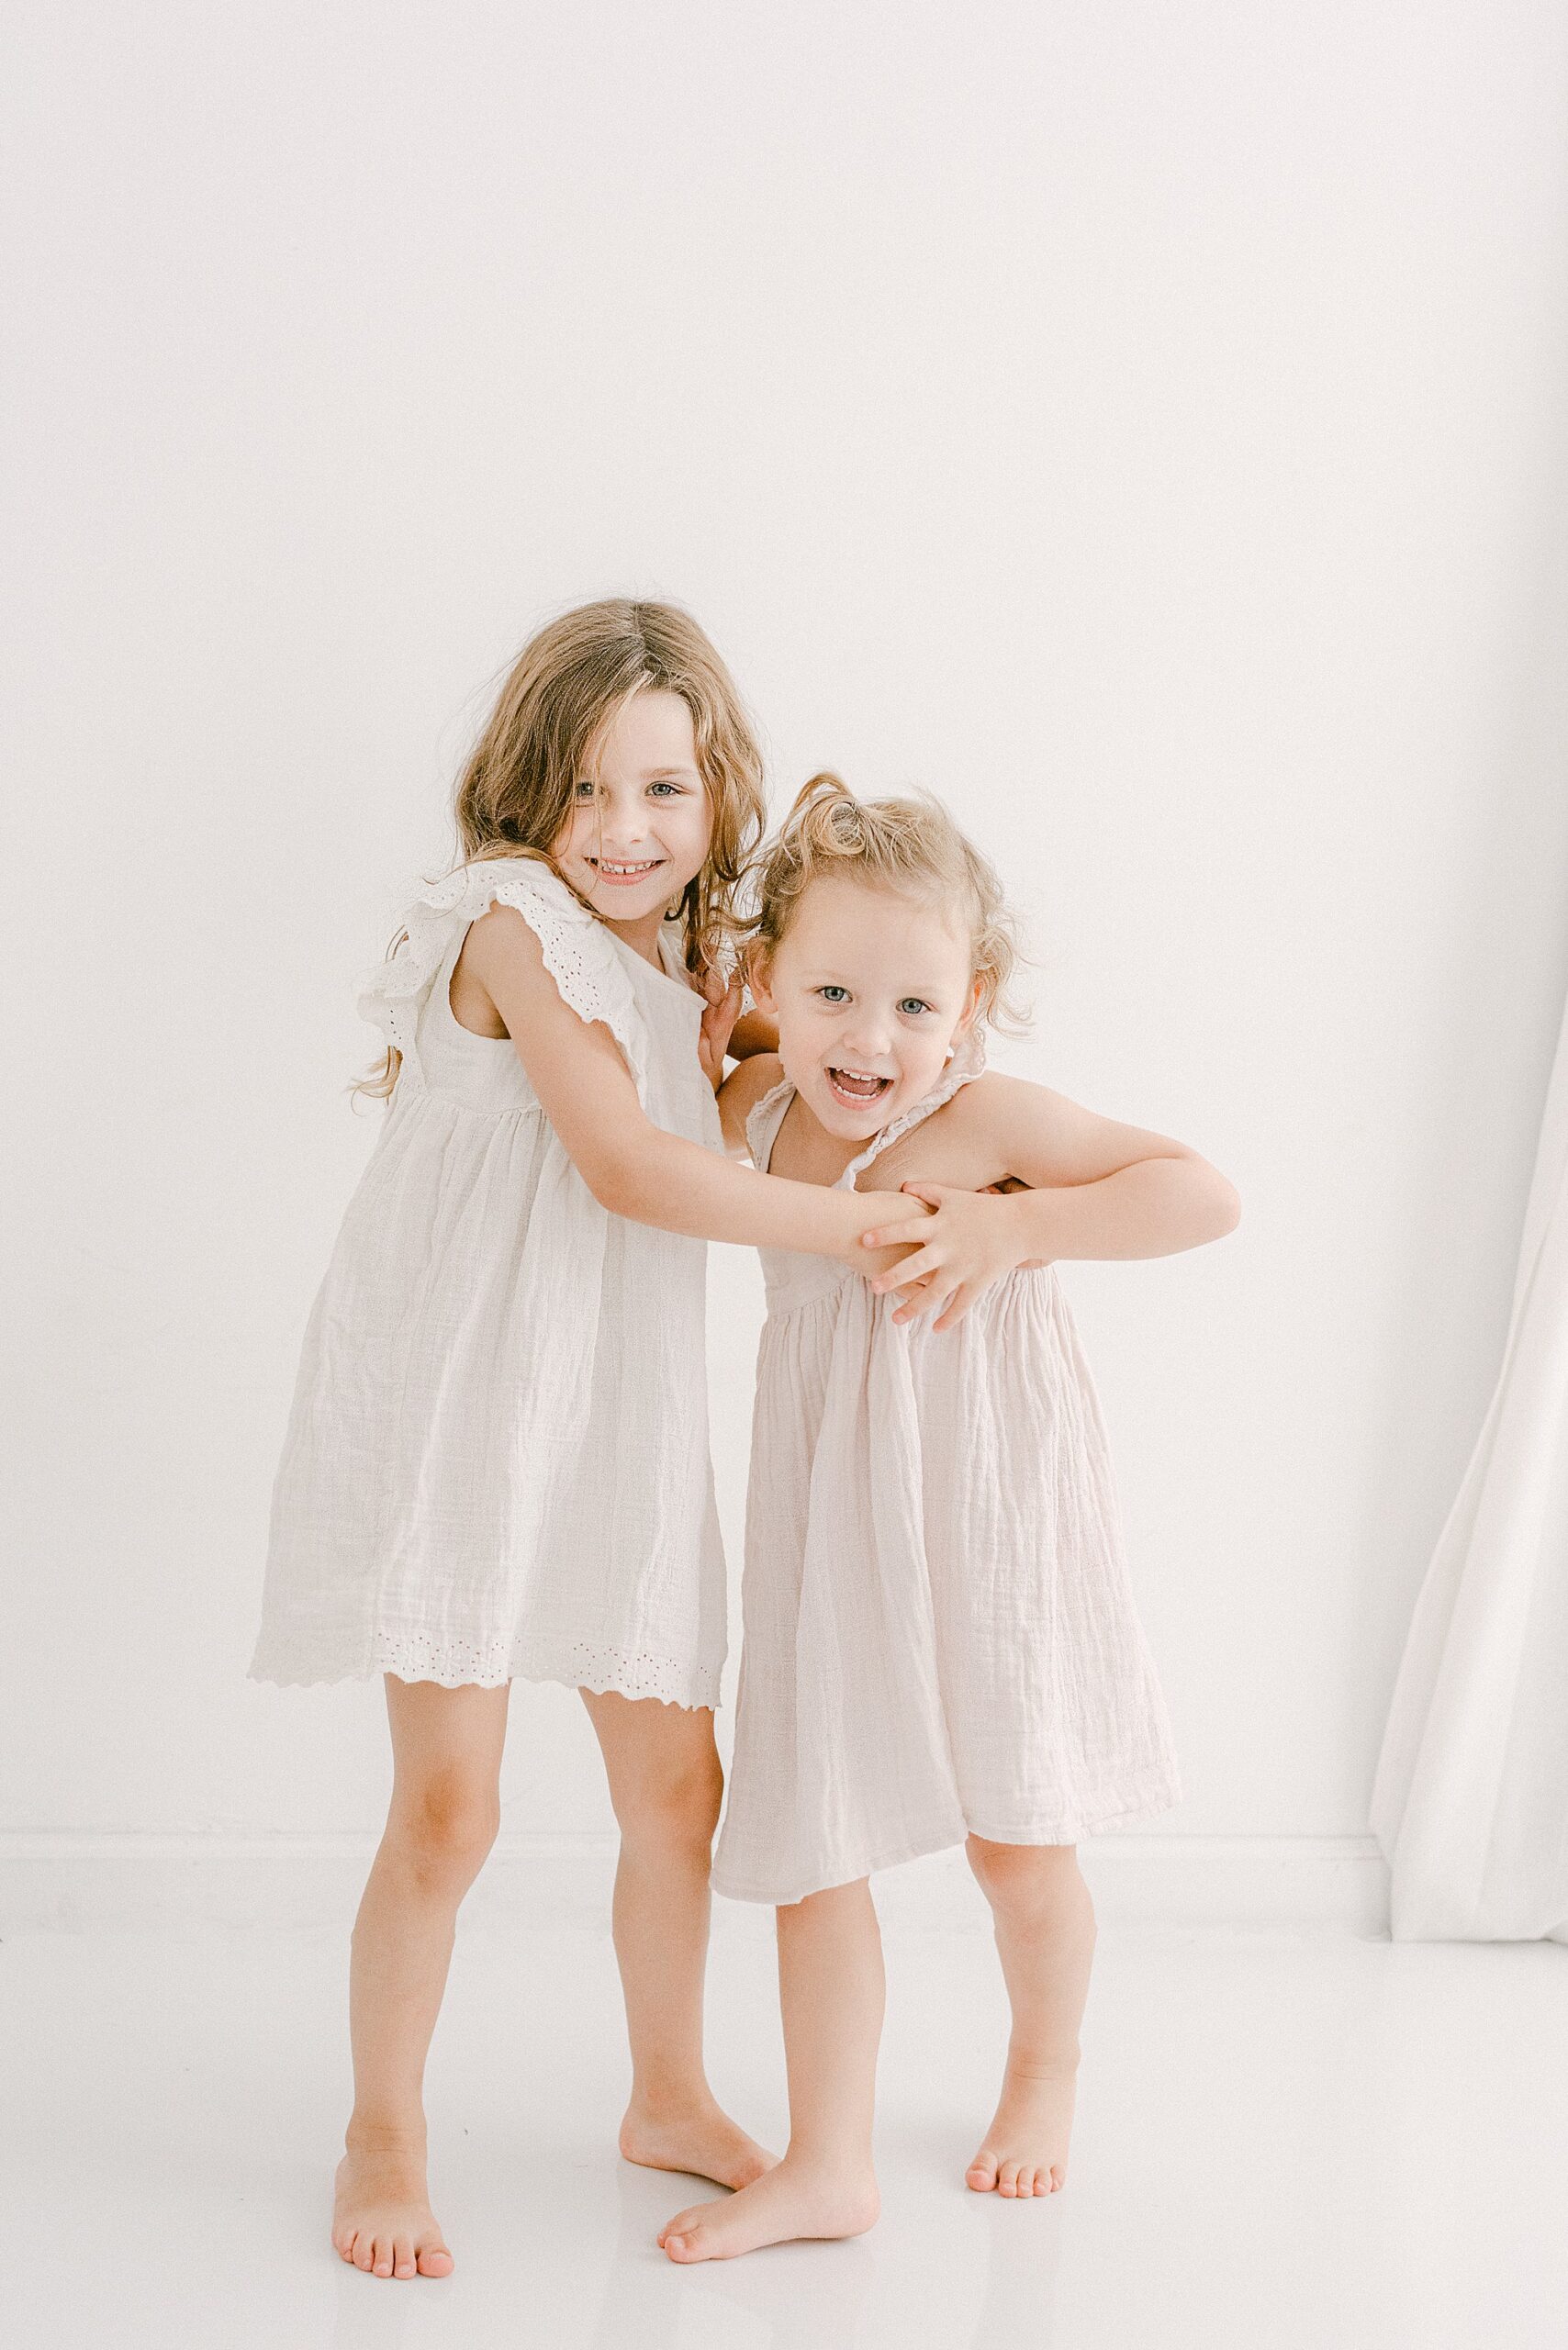 Two toddler girls dressed in white and lilac linen dresses hugging each other with big smiles